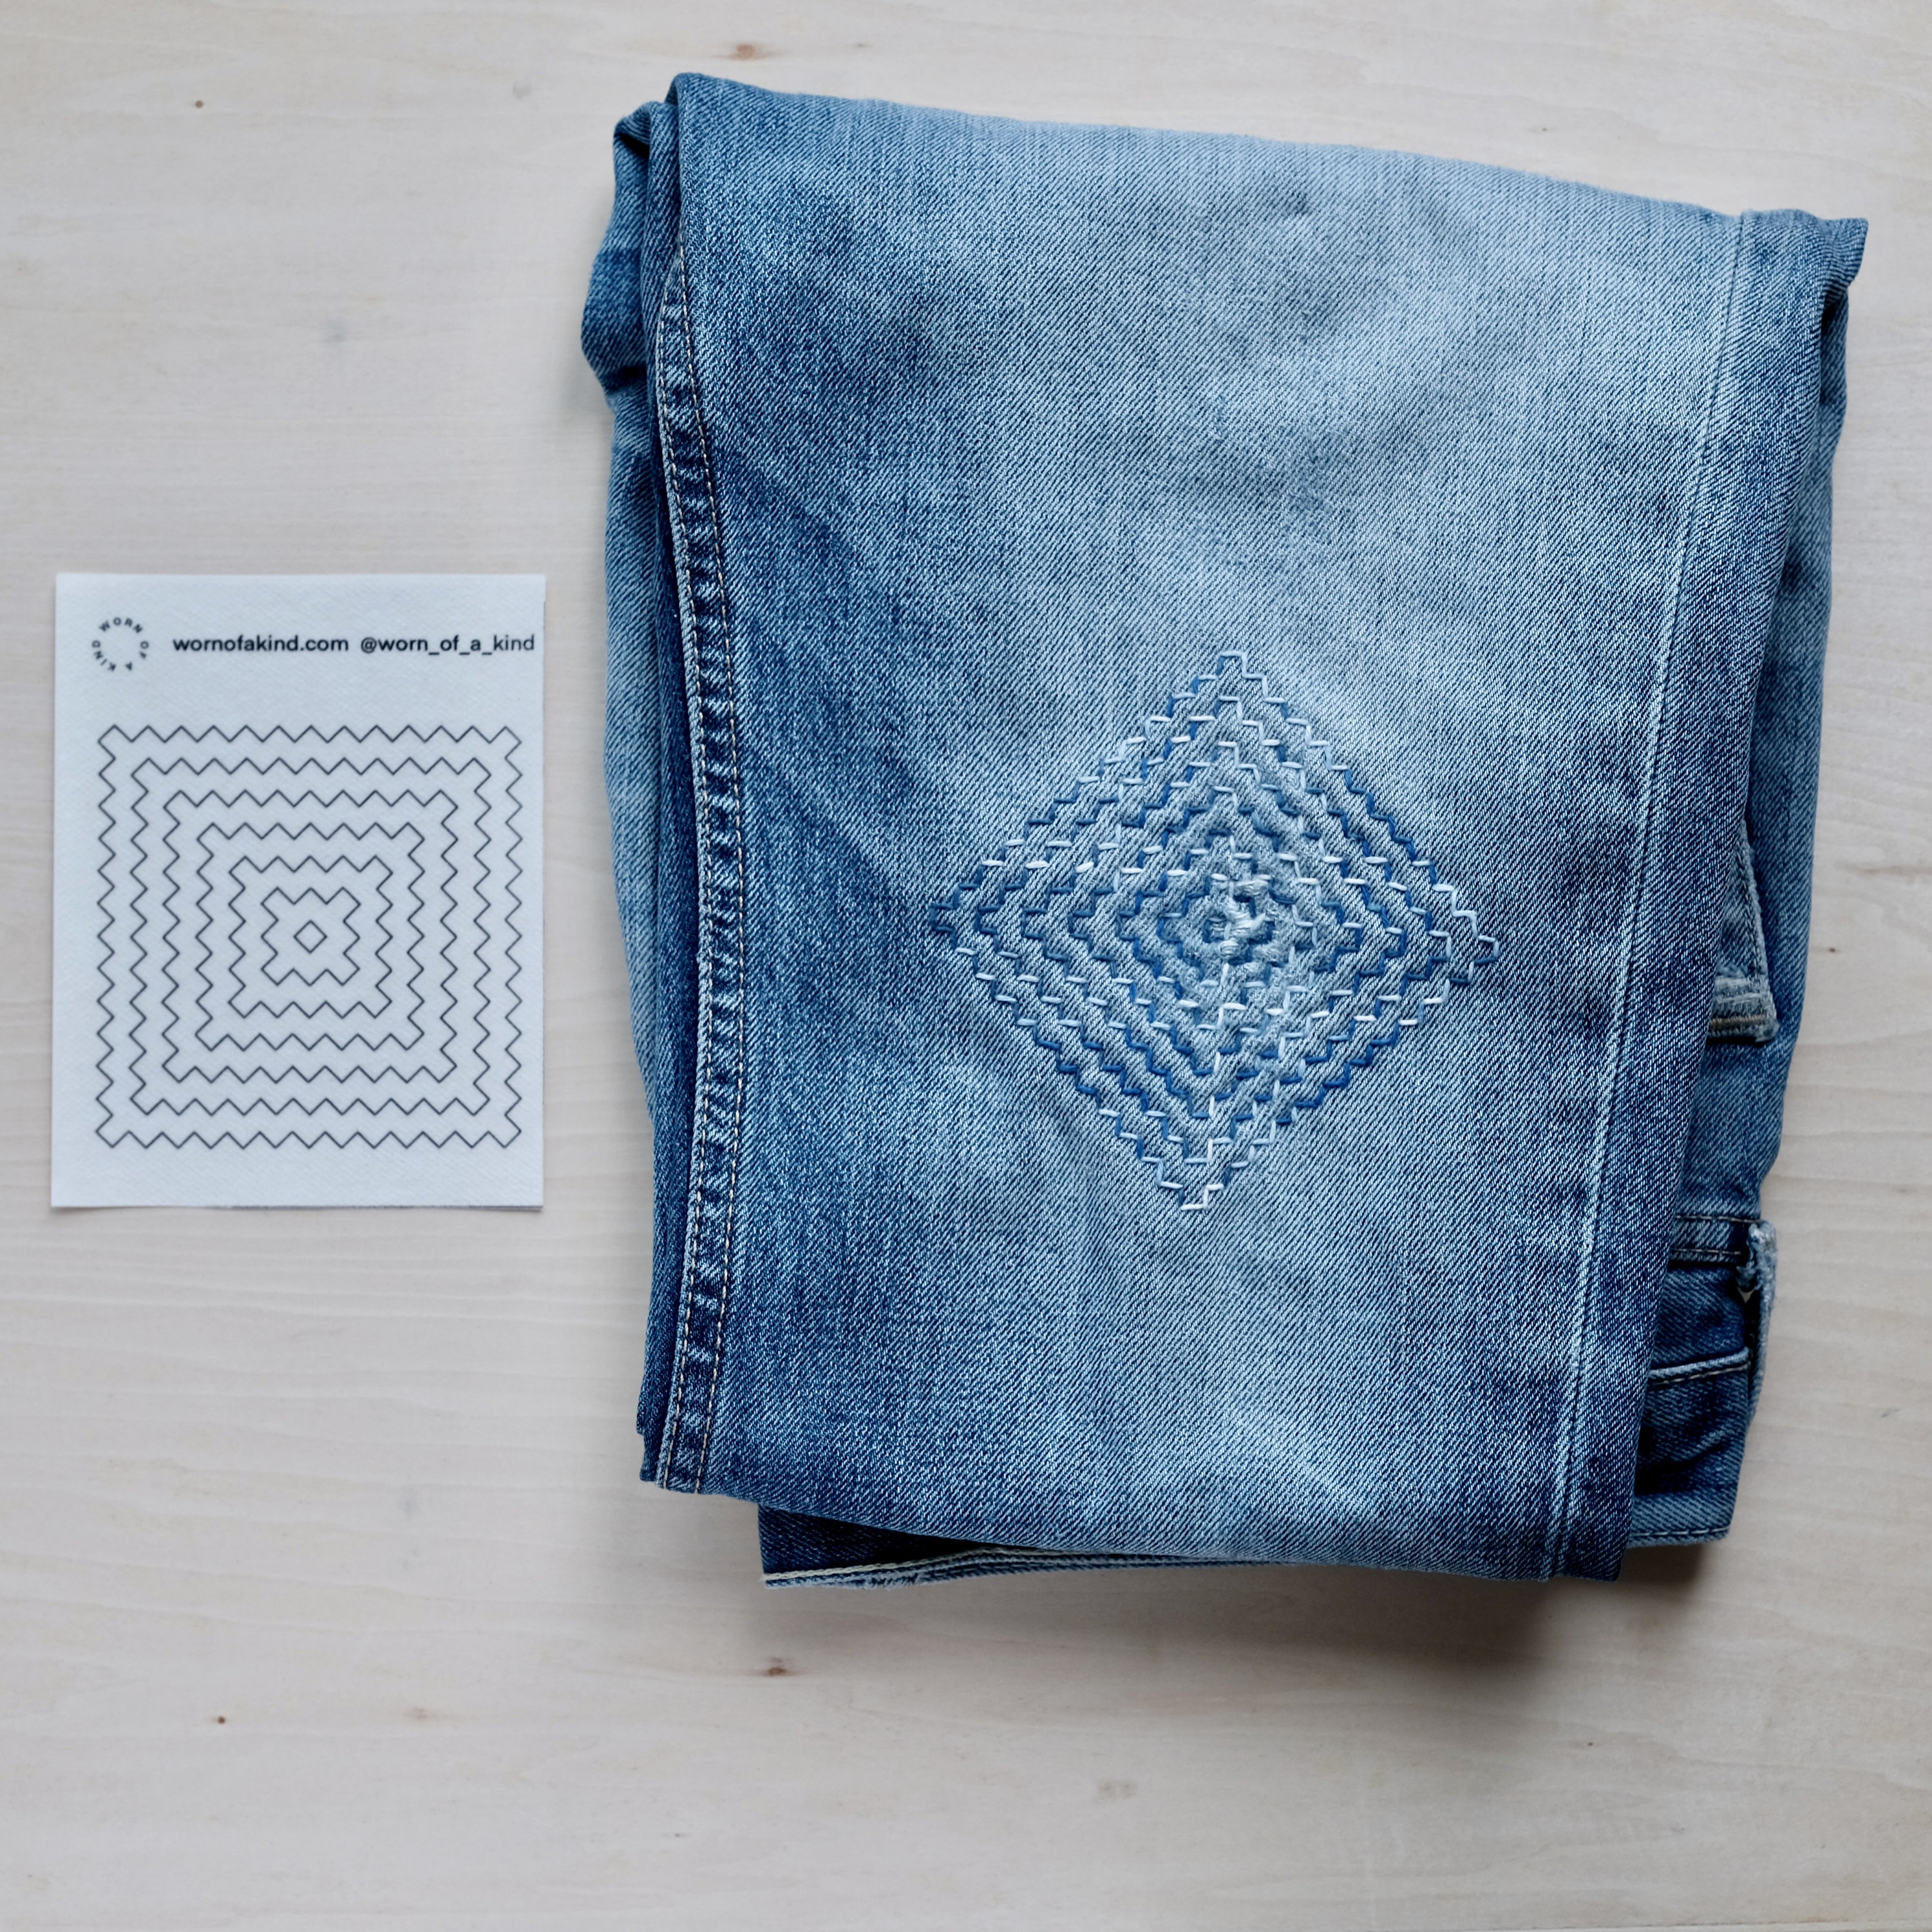 Handmade Embroidered Denim Patch With a Paisley Motif, Beads and Sequins,  Sashiko/boro Inspired, Sew-on, Visible Mending, Repurposed Fabric 